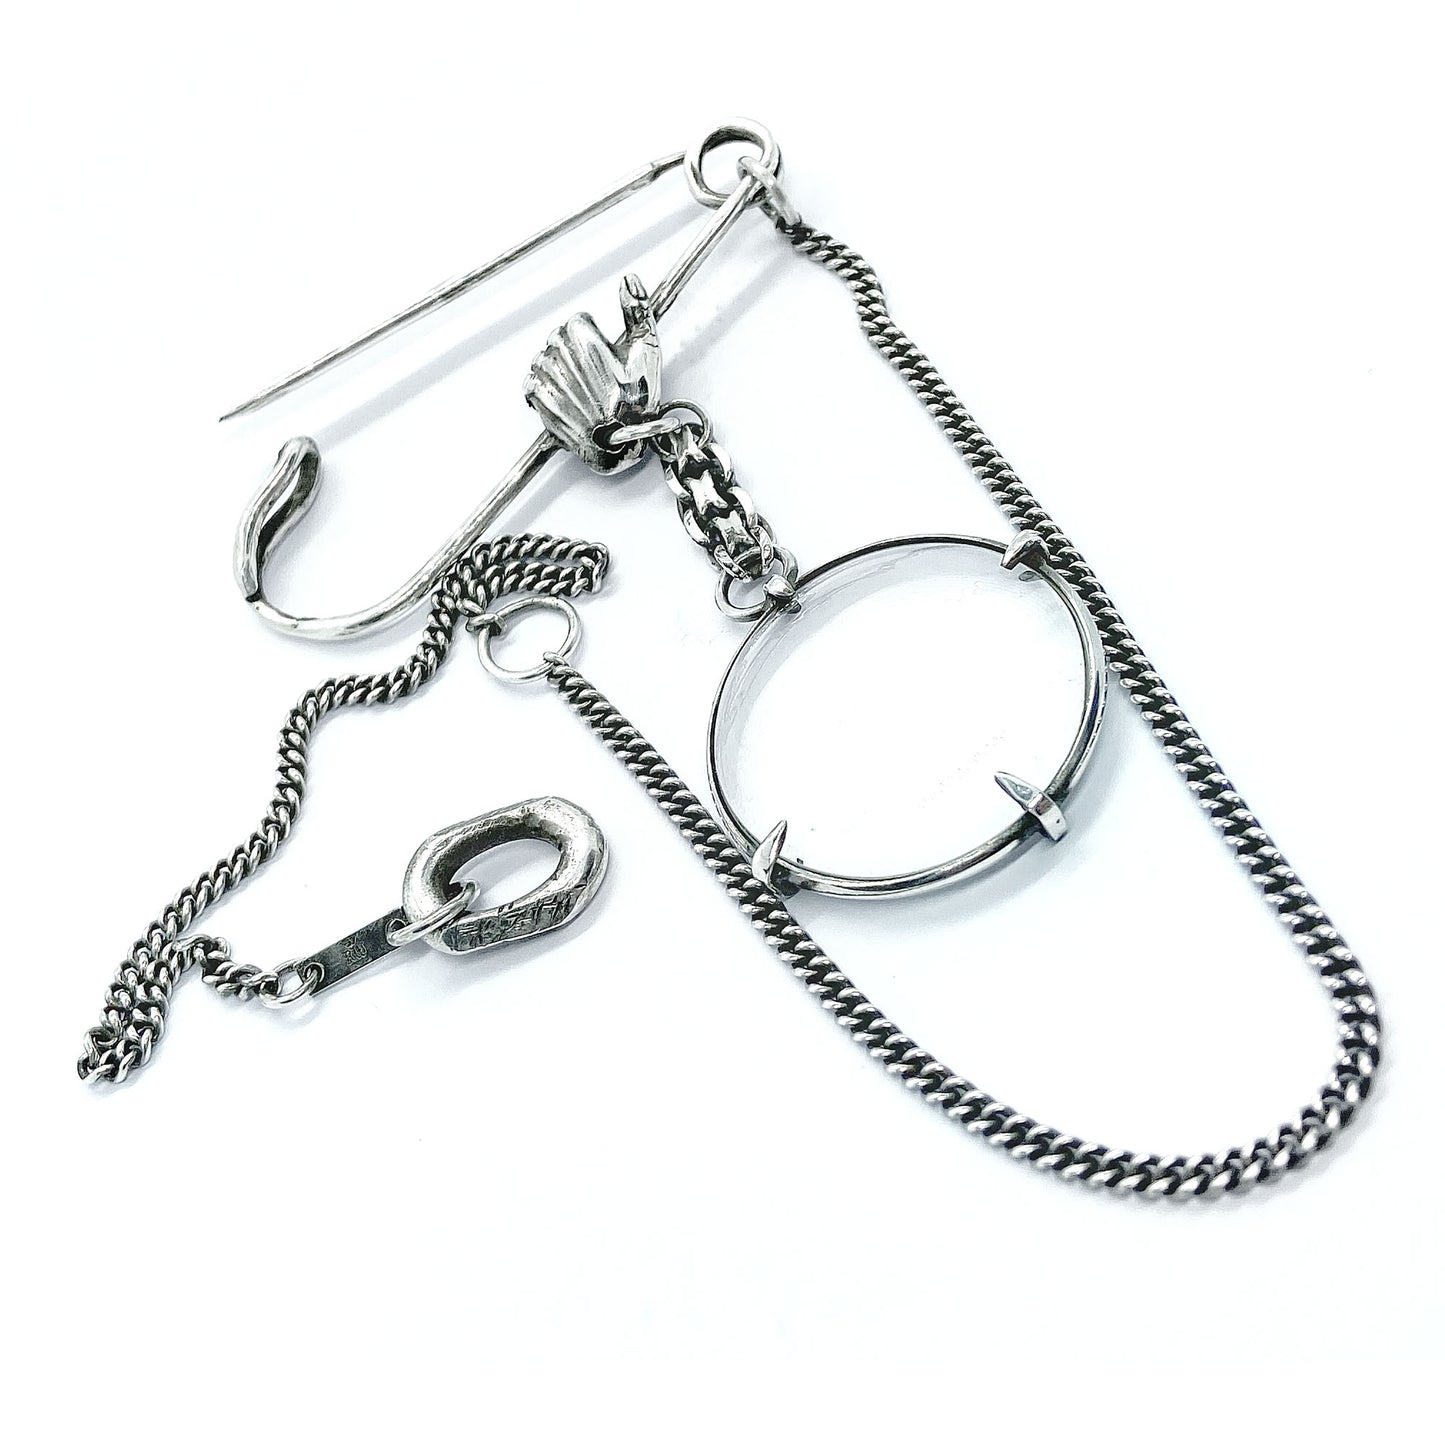 Magnifying glass brooch.